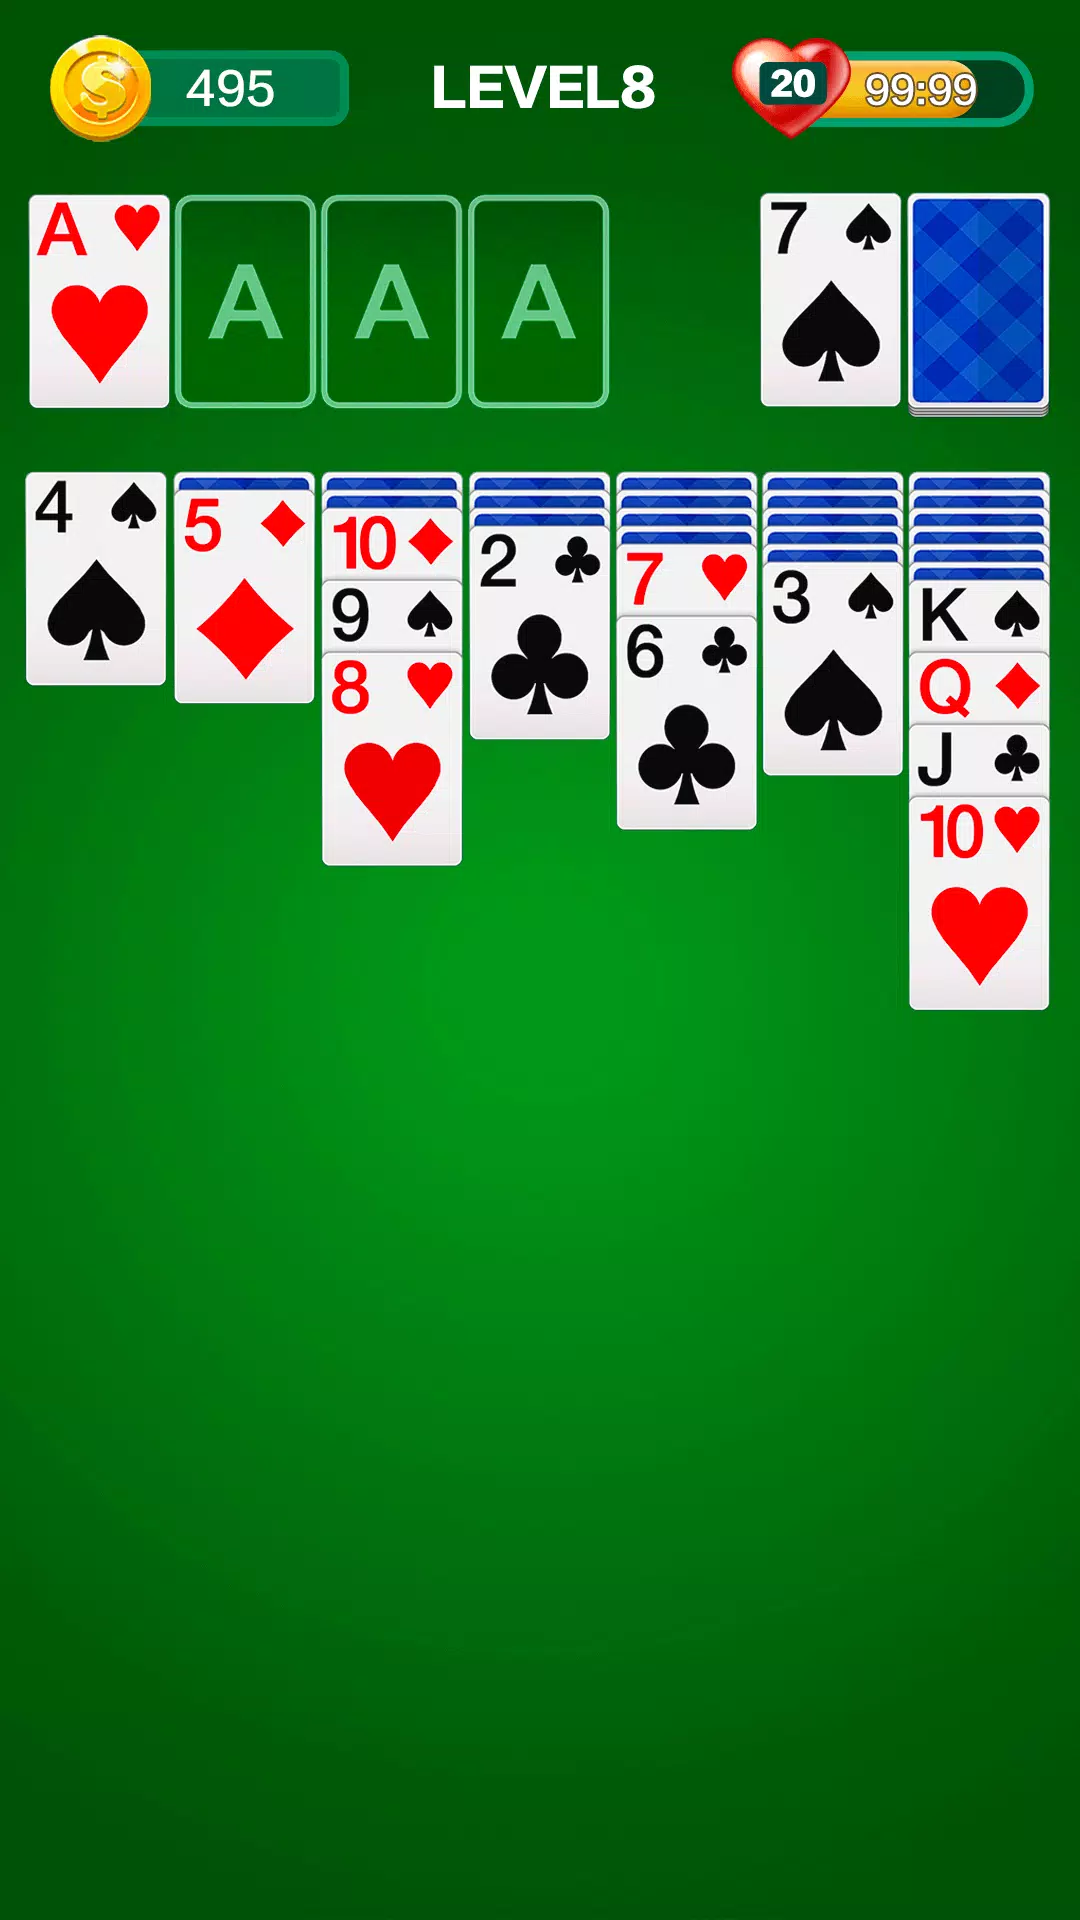 Spider Solitaire Deluxe® 2 APK for Android Download